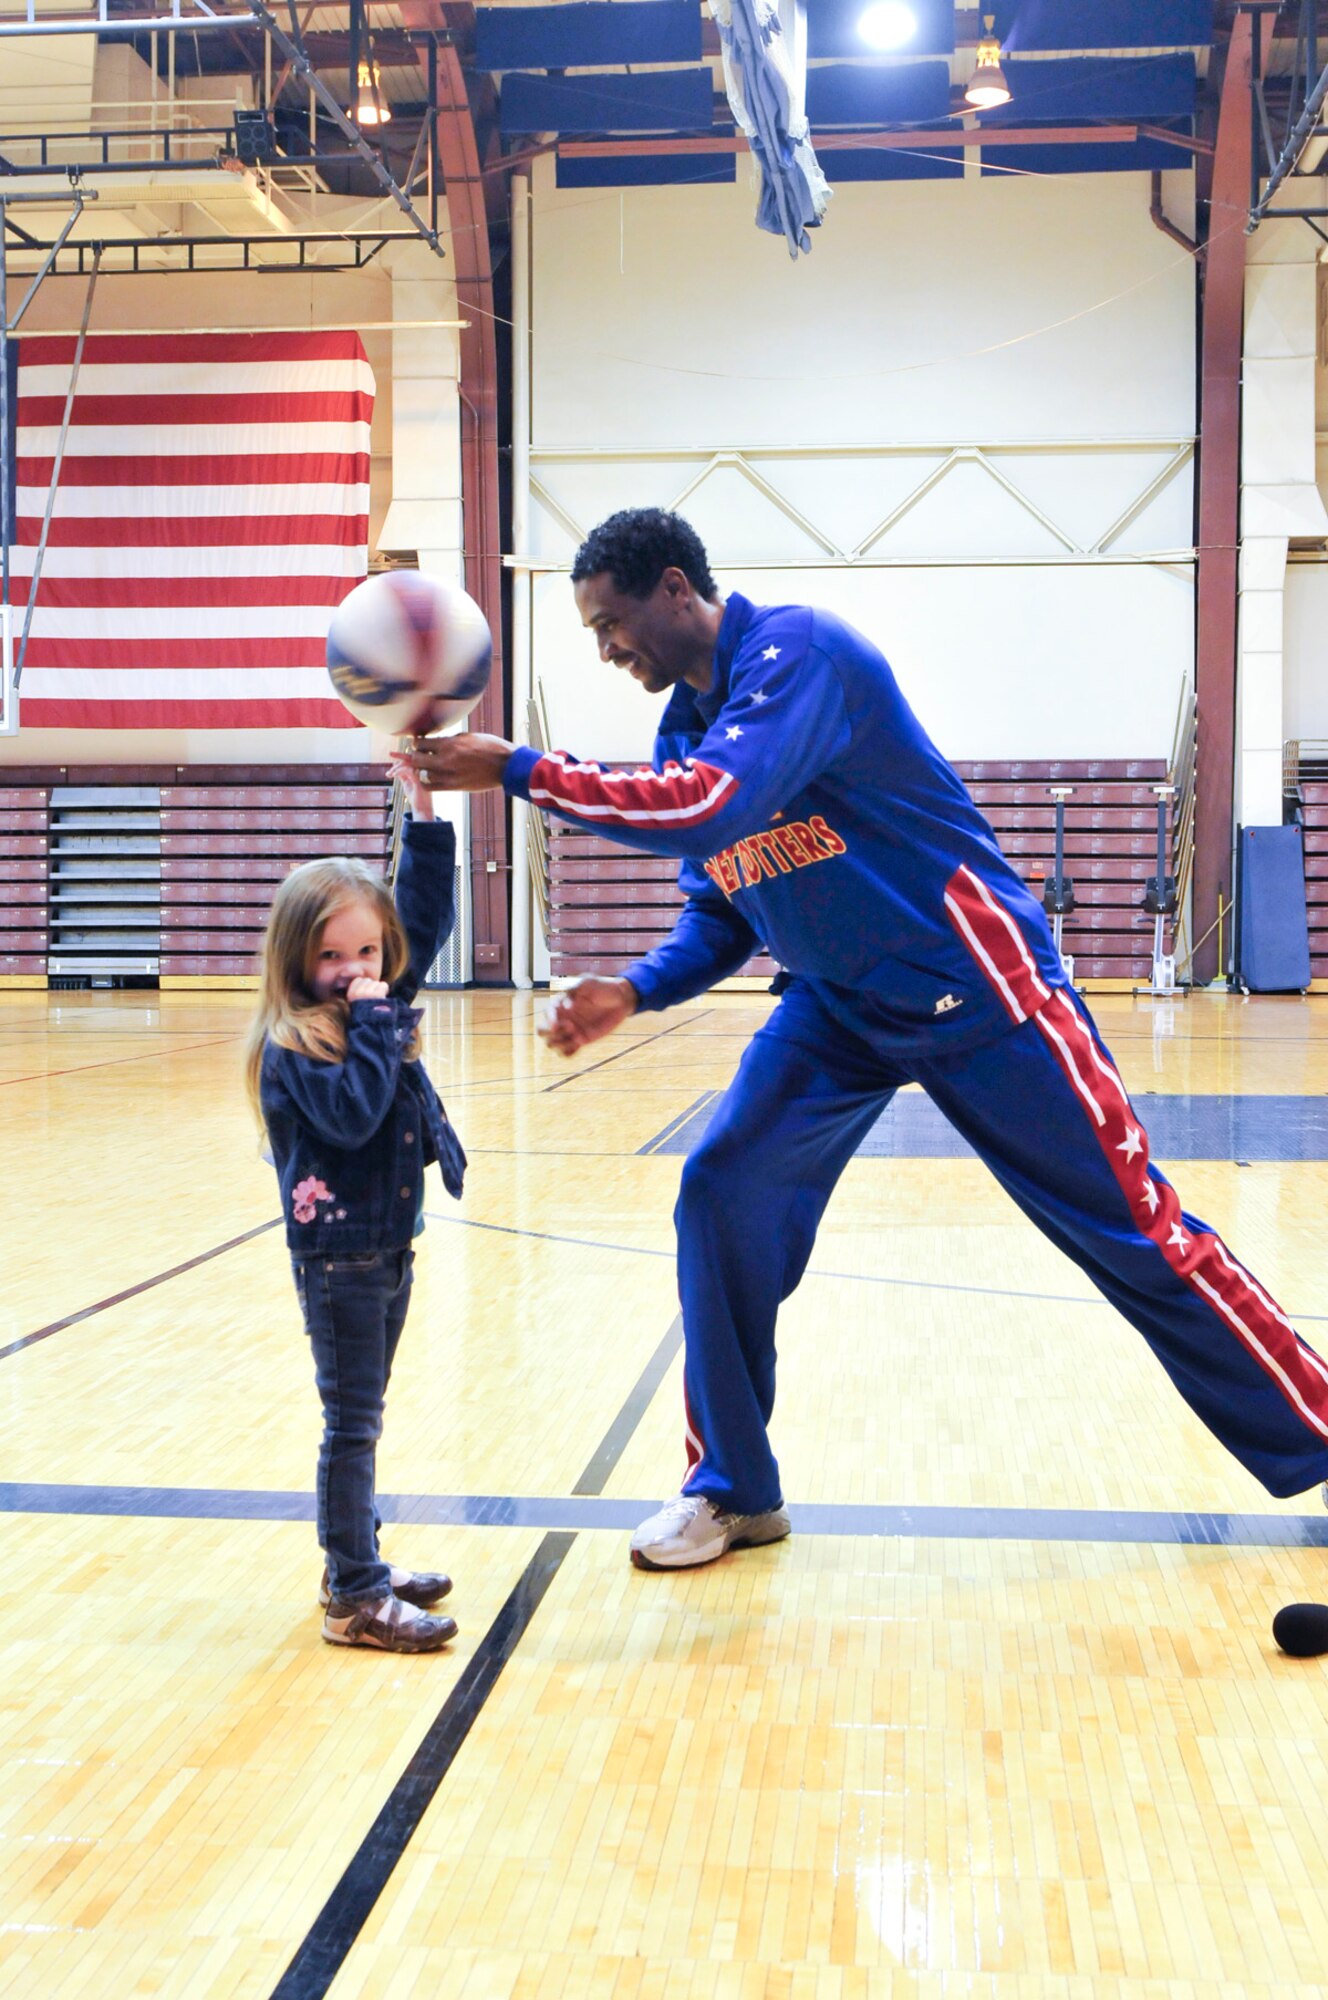 JOINT BASE ELMENDORF-RICHARDSON,Alaska-Wun Versher,"The Shot", Harlem Globe Trotters team member, assisted by Lexi Page, daughter of Army Sgt Vincent Page. The demonstration was at the Buckner Fitness Center on Joint Base Elmendorf-Richardson on 17 April 2012. It was followed by a autograph and photo session. (USAF Photo by Steven White/JBER/PA)